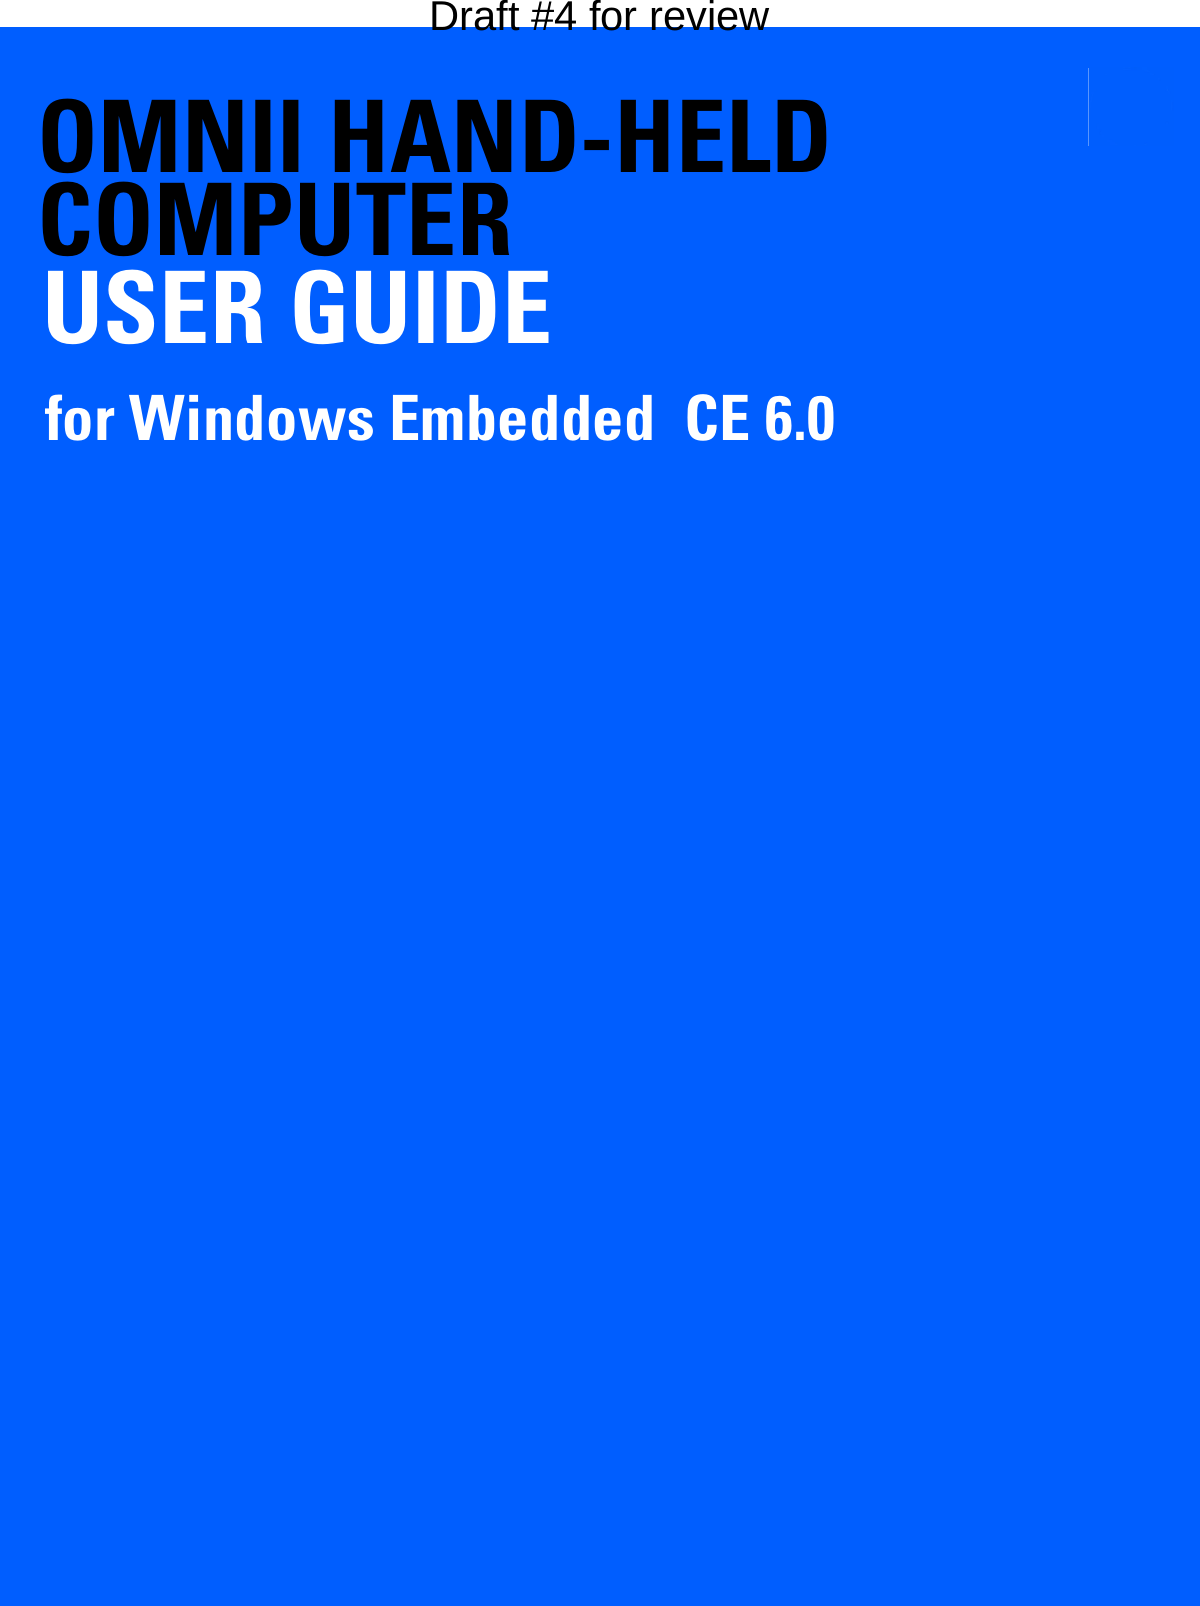 OMNII HAND-HELD COMPUTERUSER GUIDEfor Windows Embedded  CE 6.0Draft #4 for review